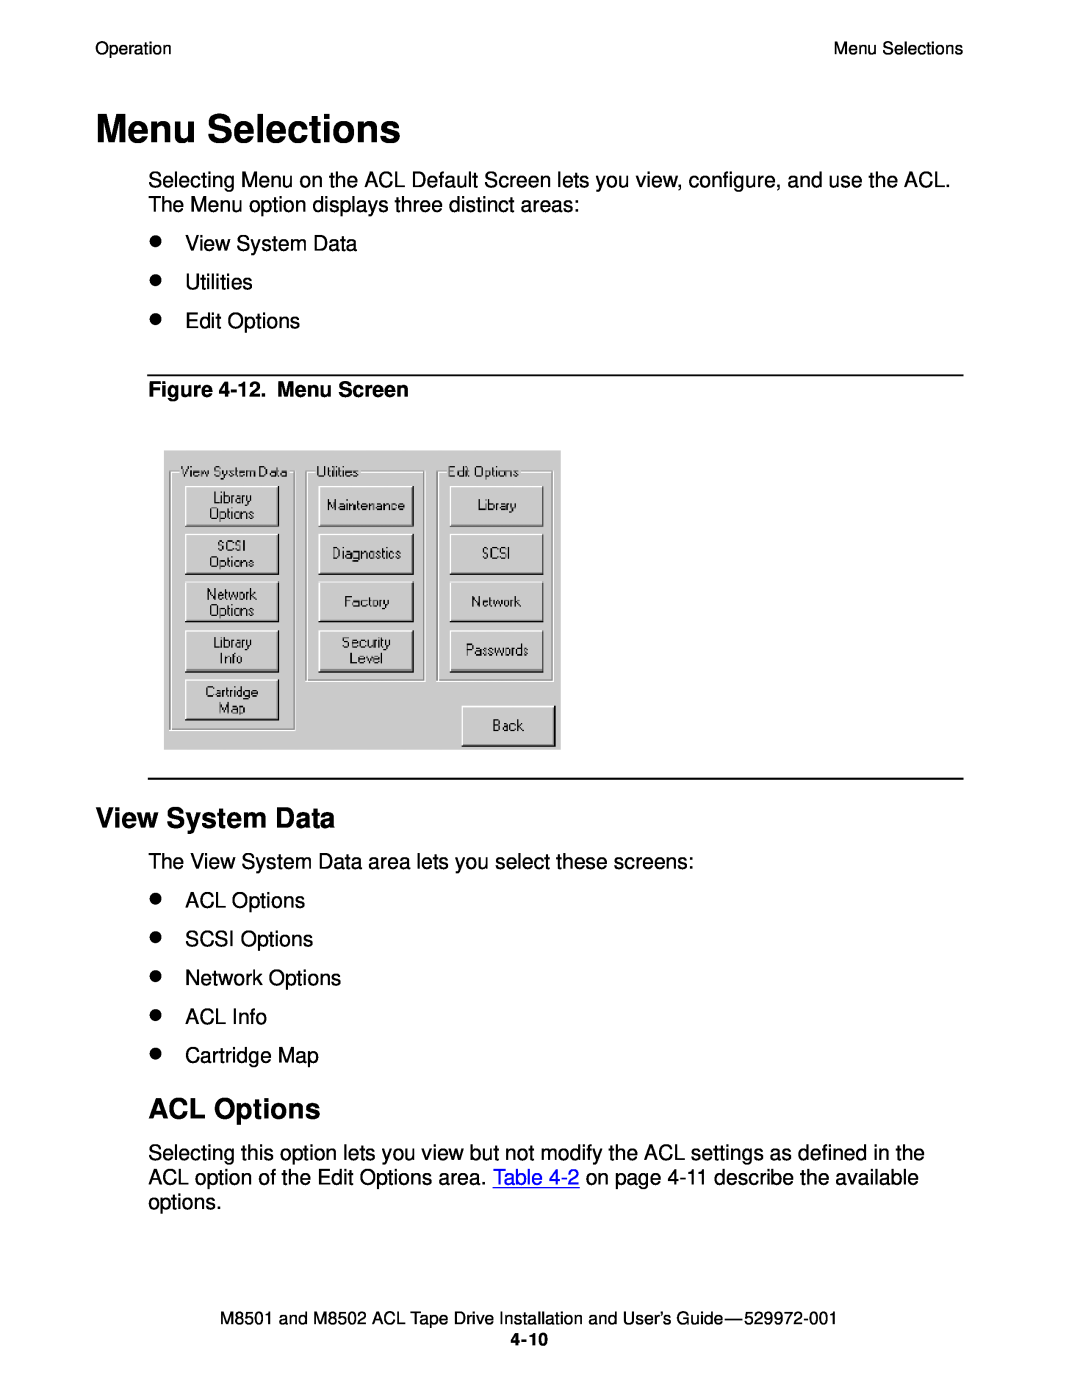 SMC Networks M8501 manual Menu Selections, View System Data, ACL Options, 12. Menu Screen 